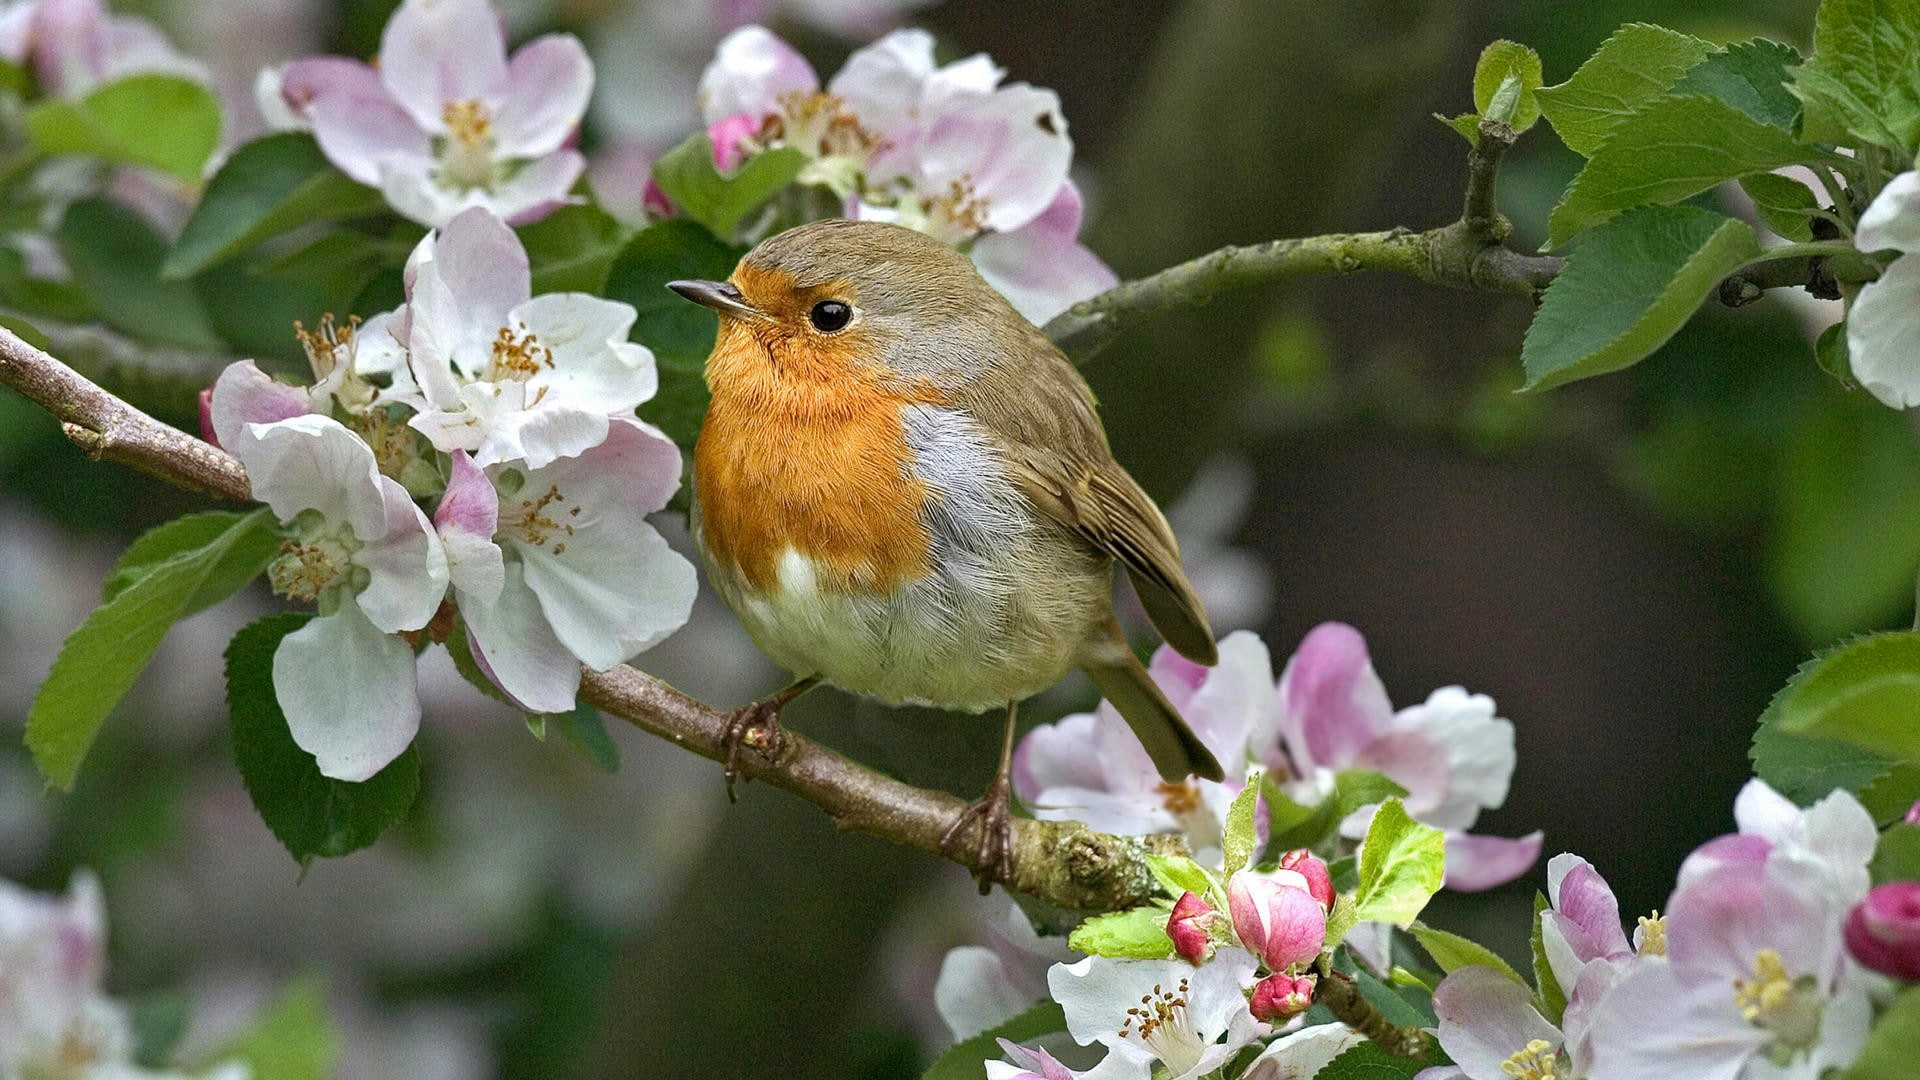 robins, birds, flowers, twigs, nature